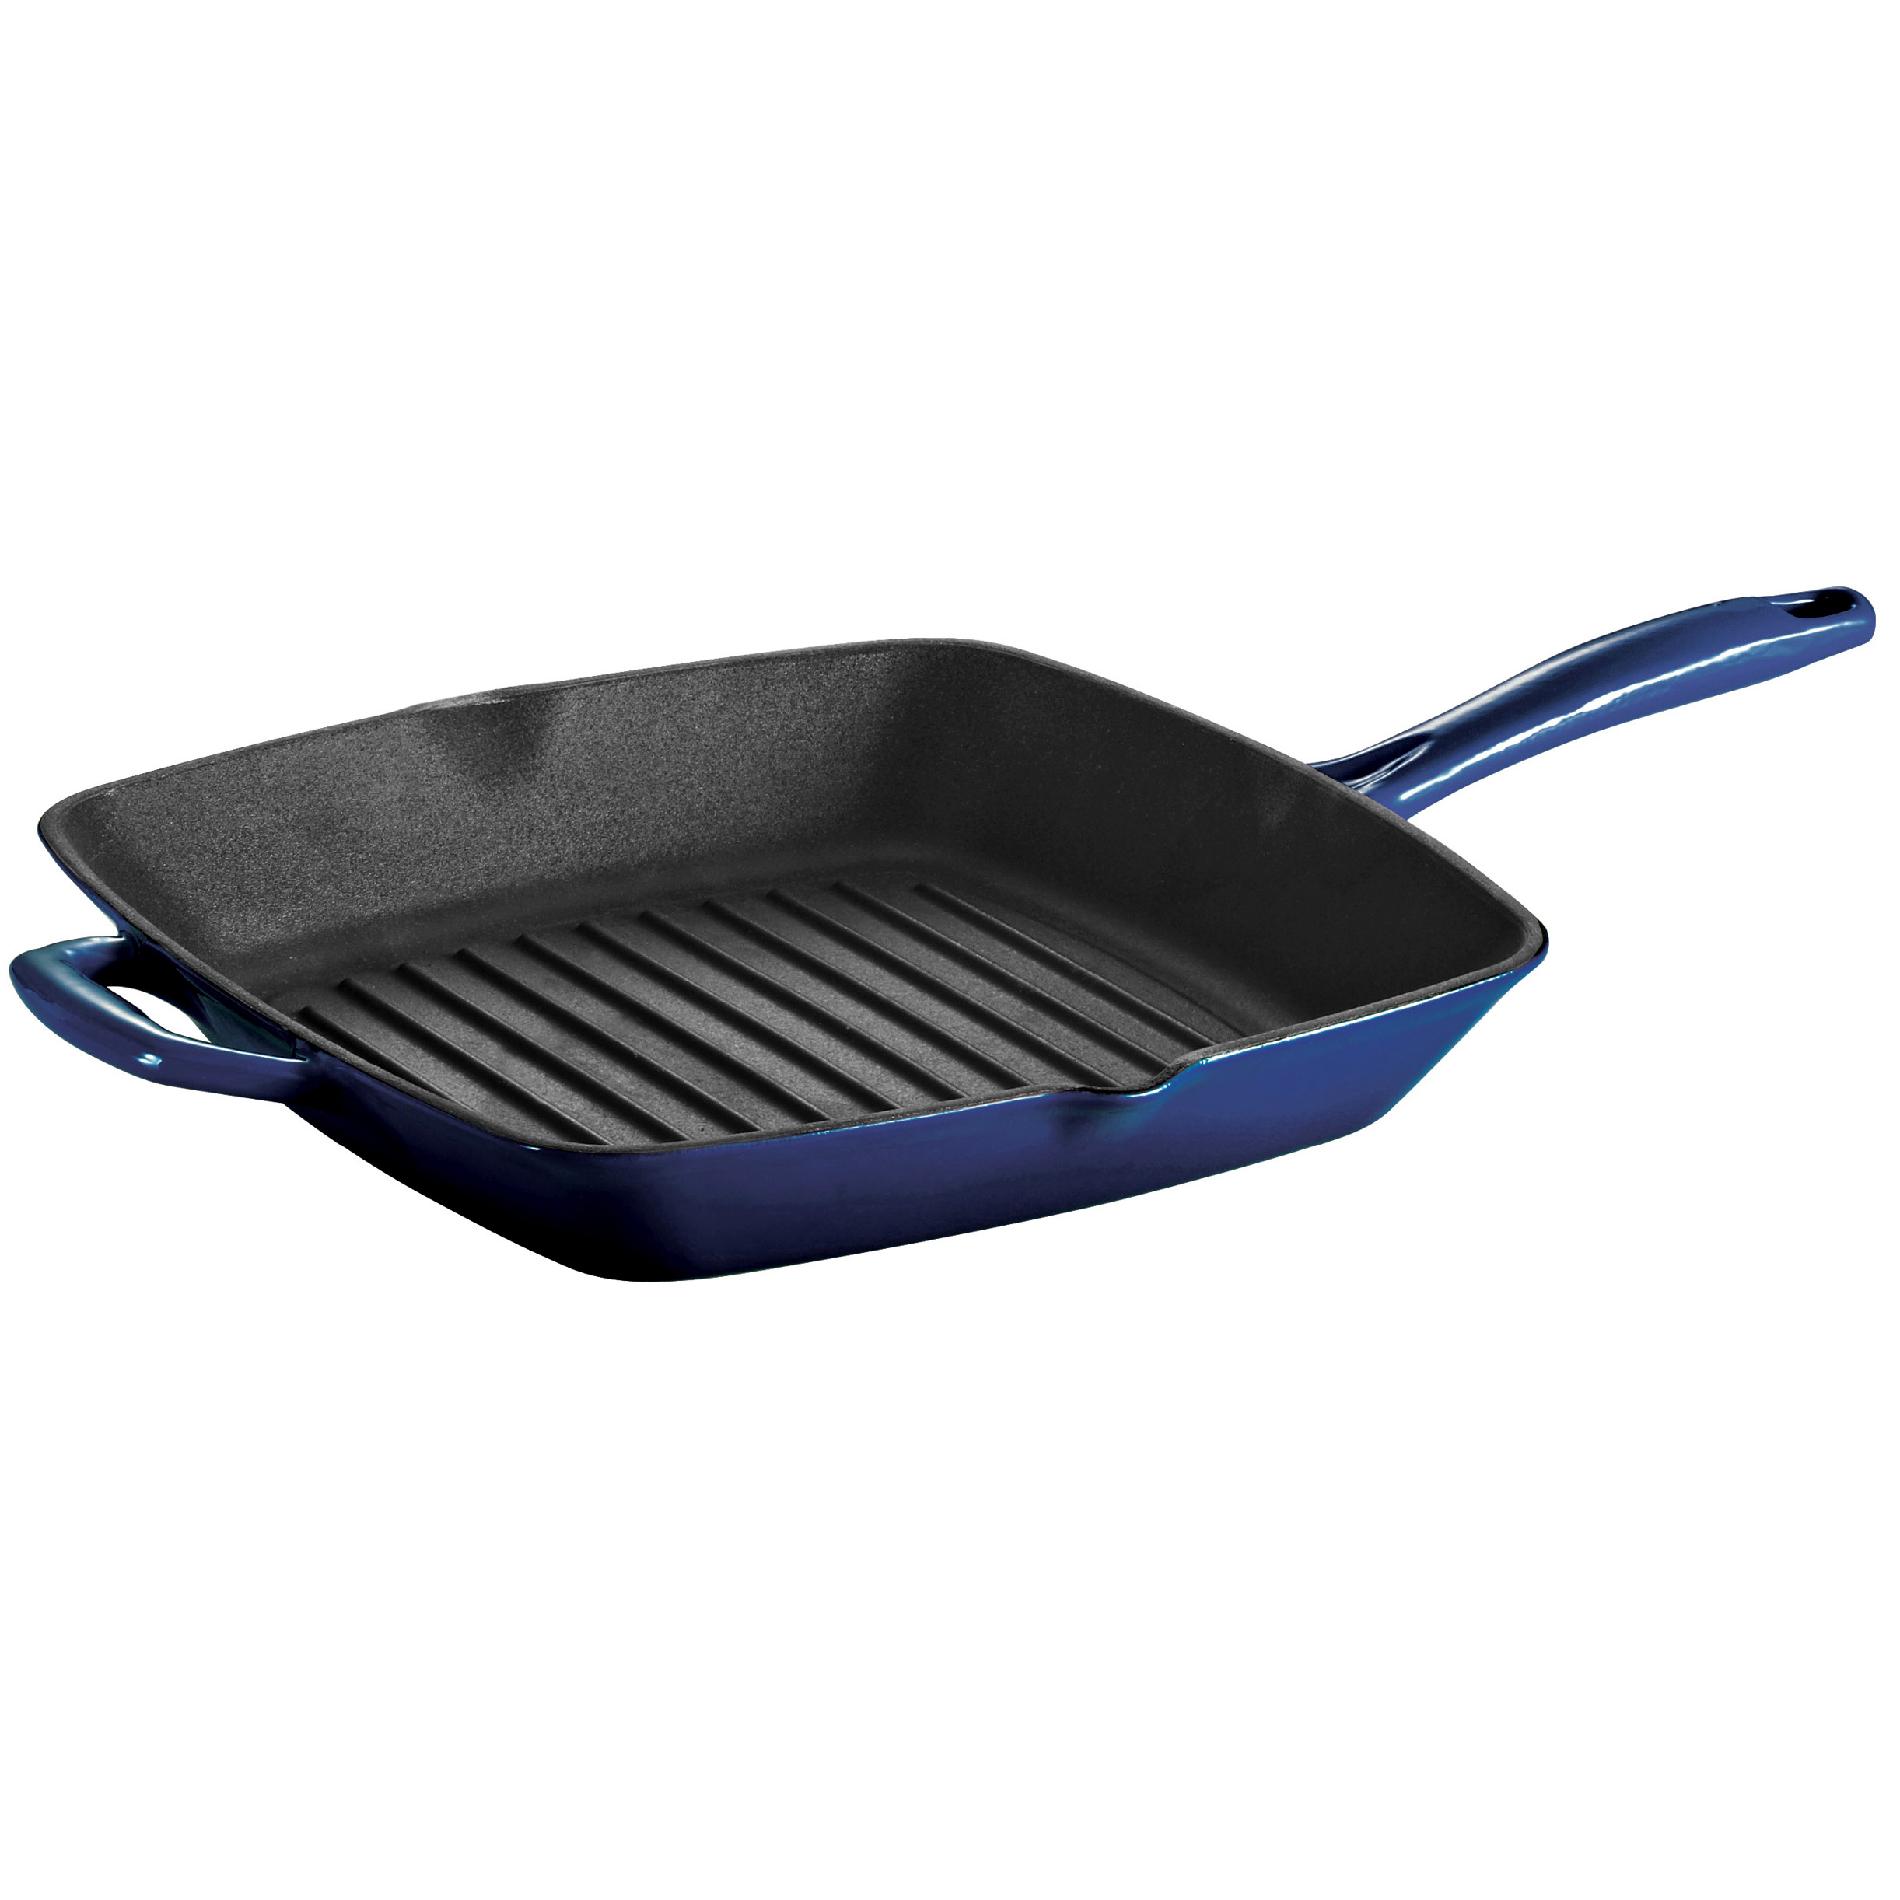 0016017077515 - GOURMET ENAMELED CAST IRON 11 IN GRILL PAN